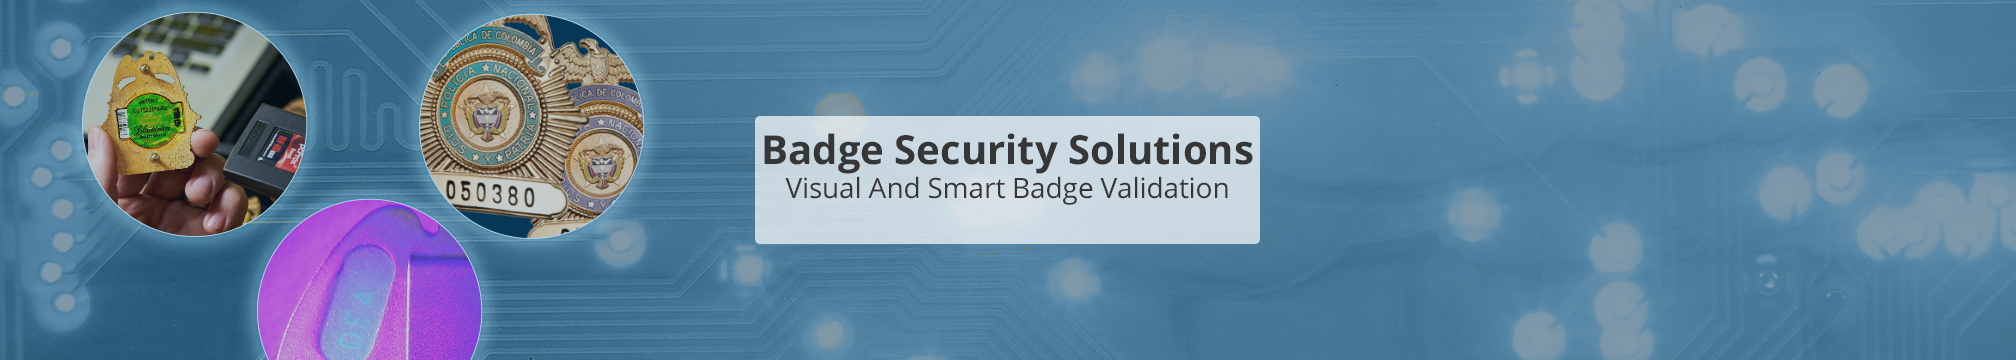 Security Badge Solutions